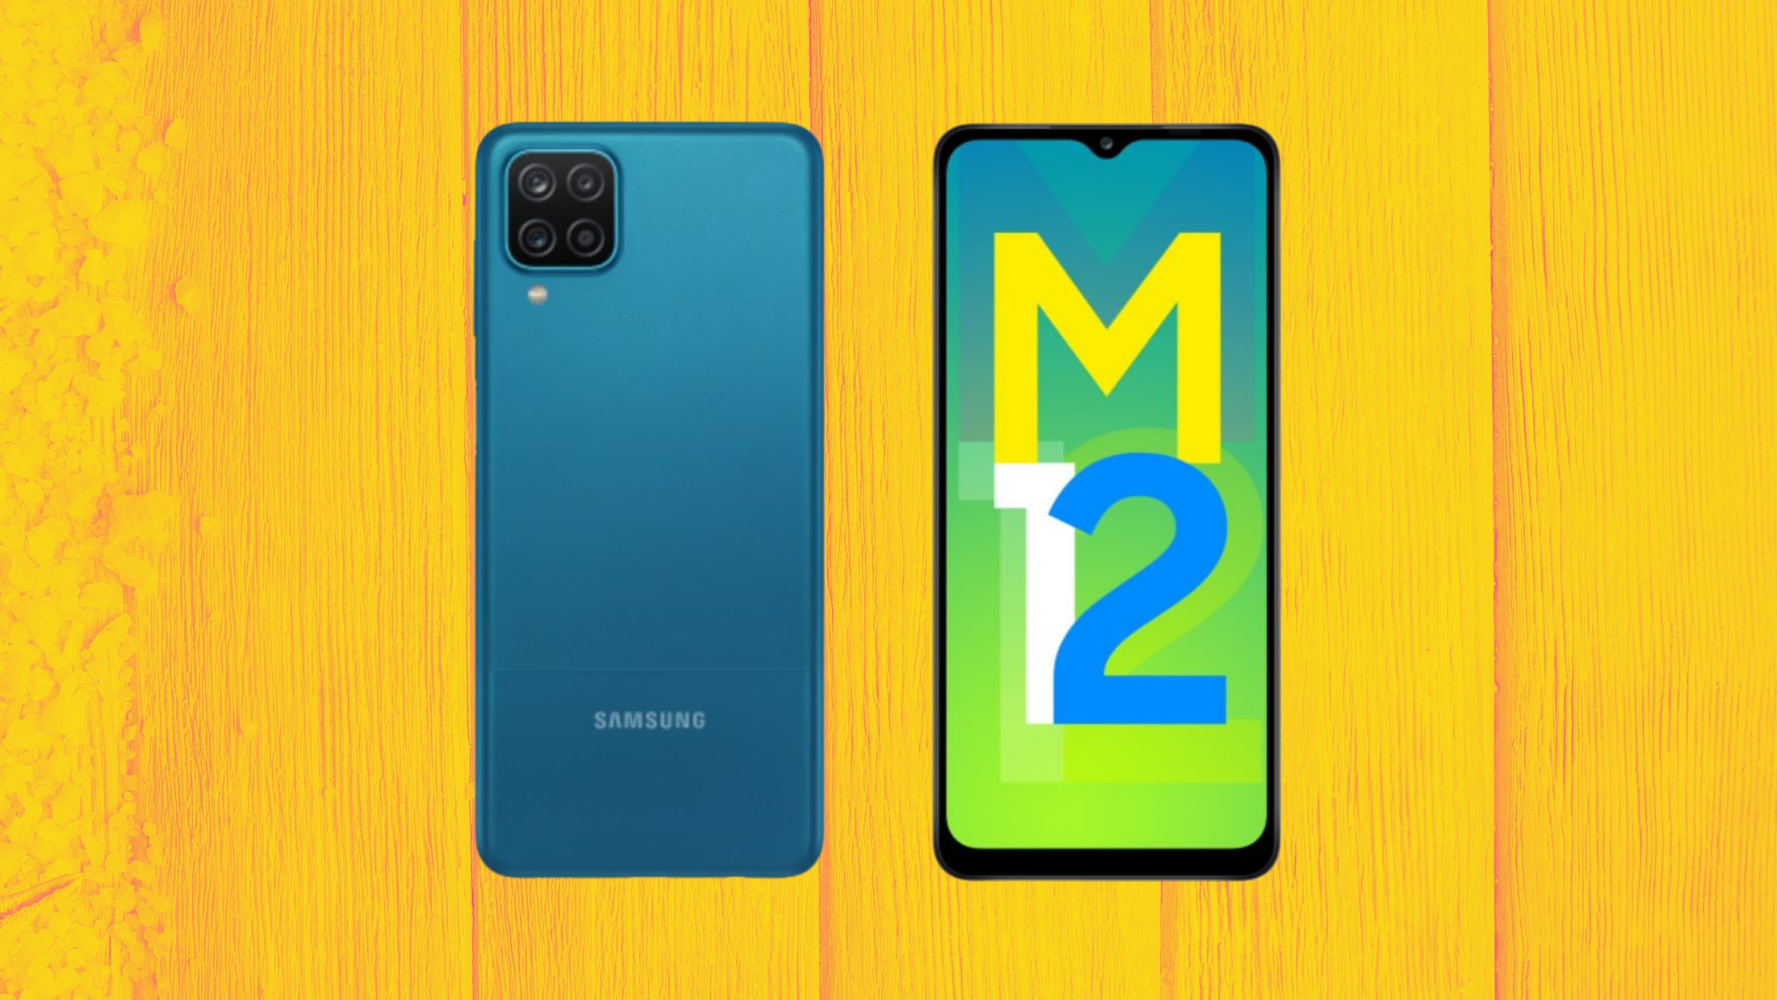 Samsung Galaxy M12 Announcement Flexes its Big Battery and Display